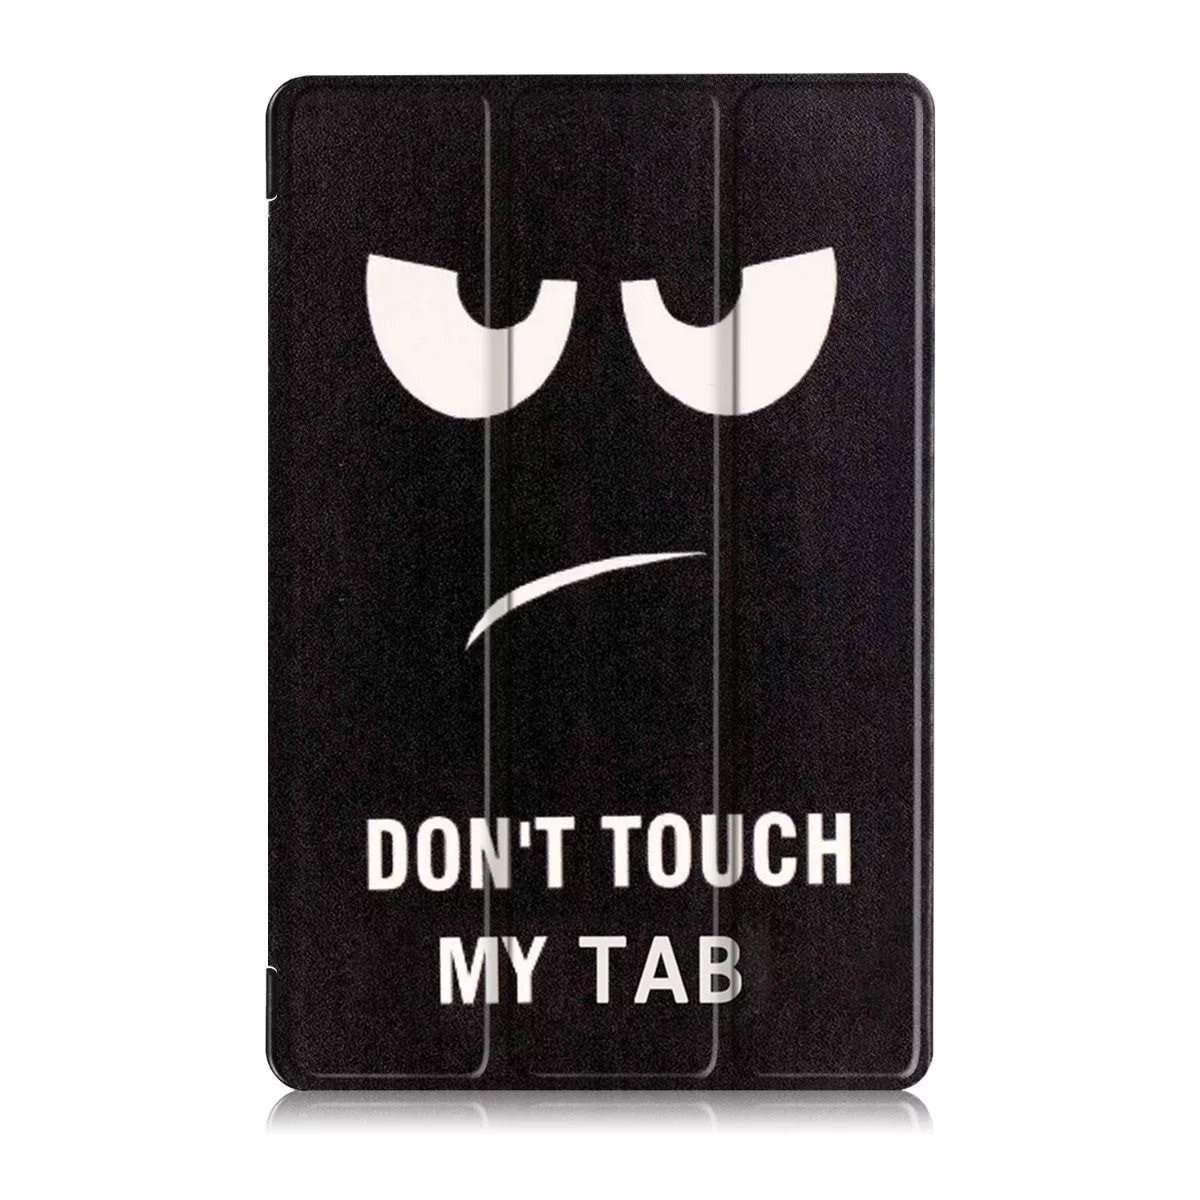 iPad Pro 10.5 Do Not Touch Smart Case - CaseBuddy